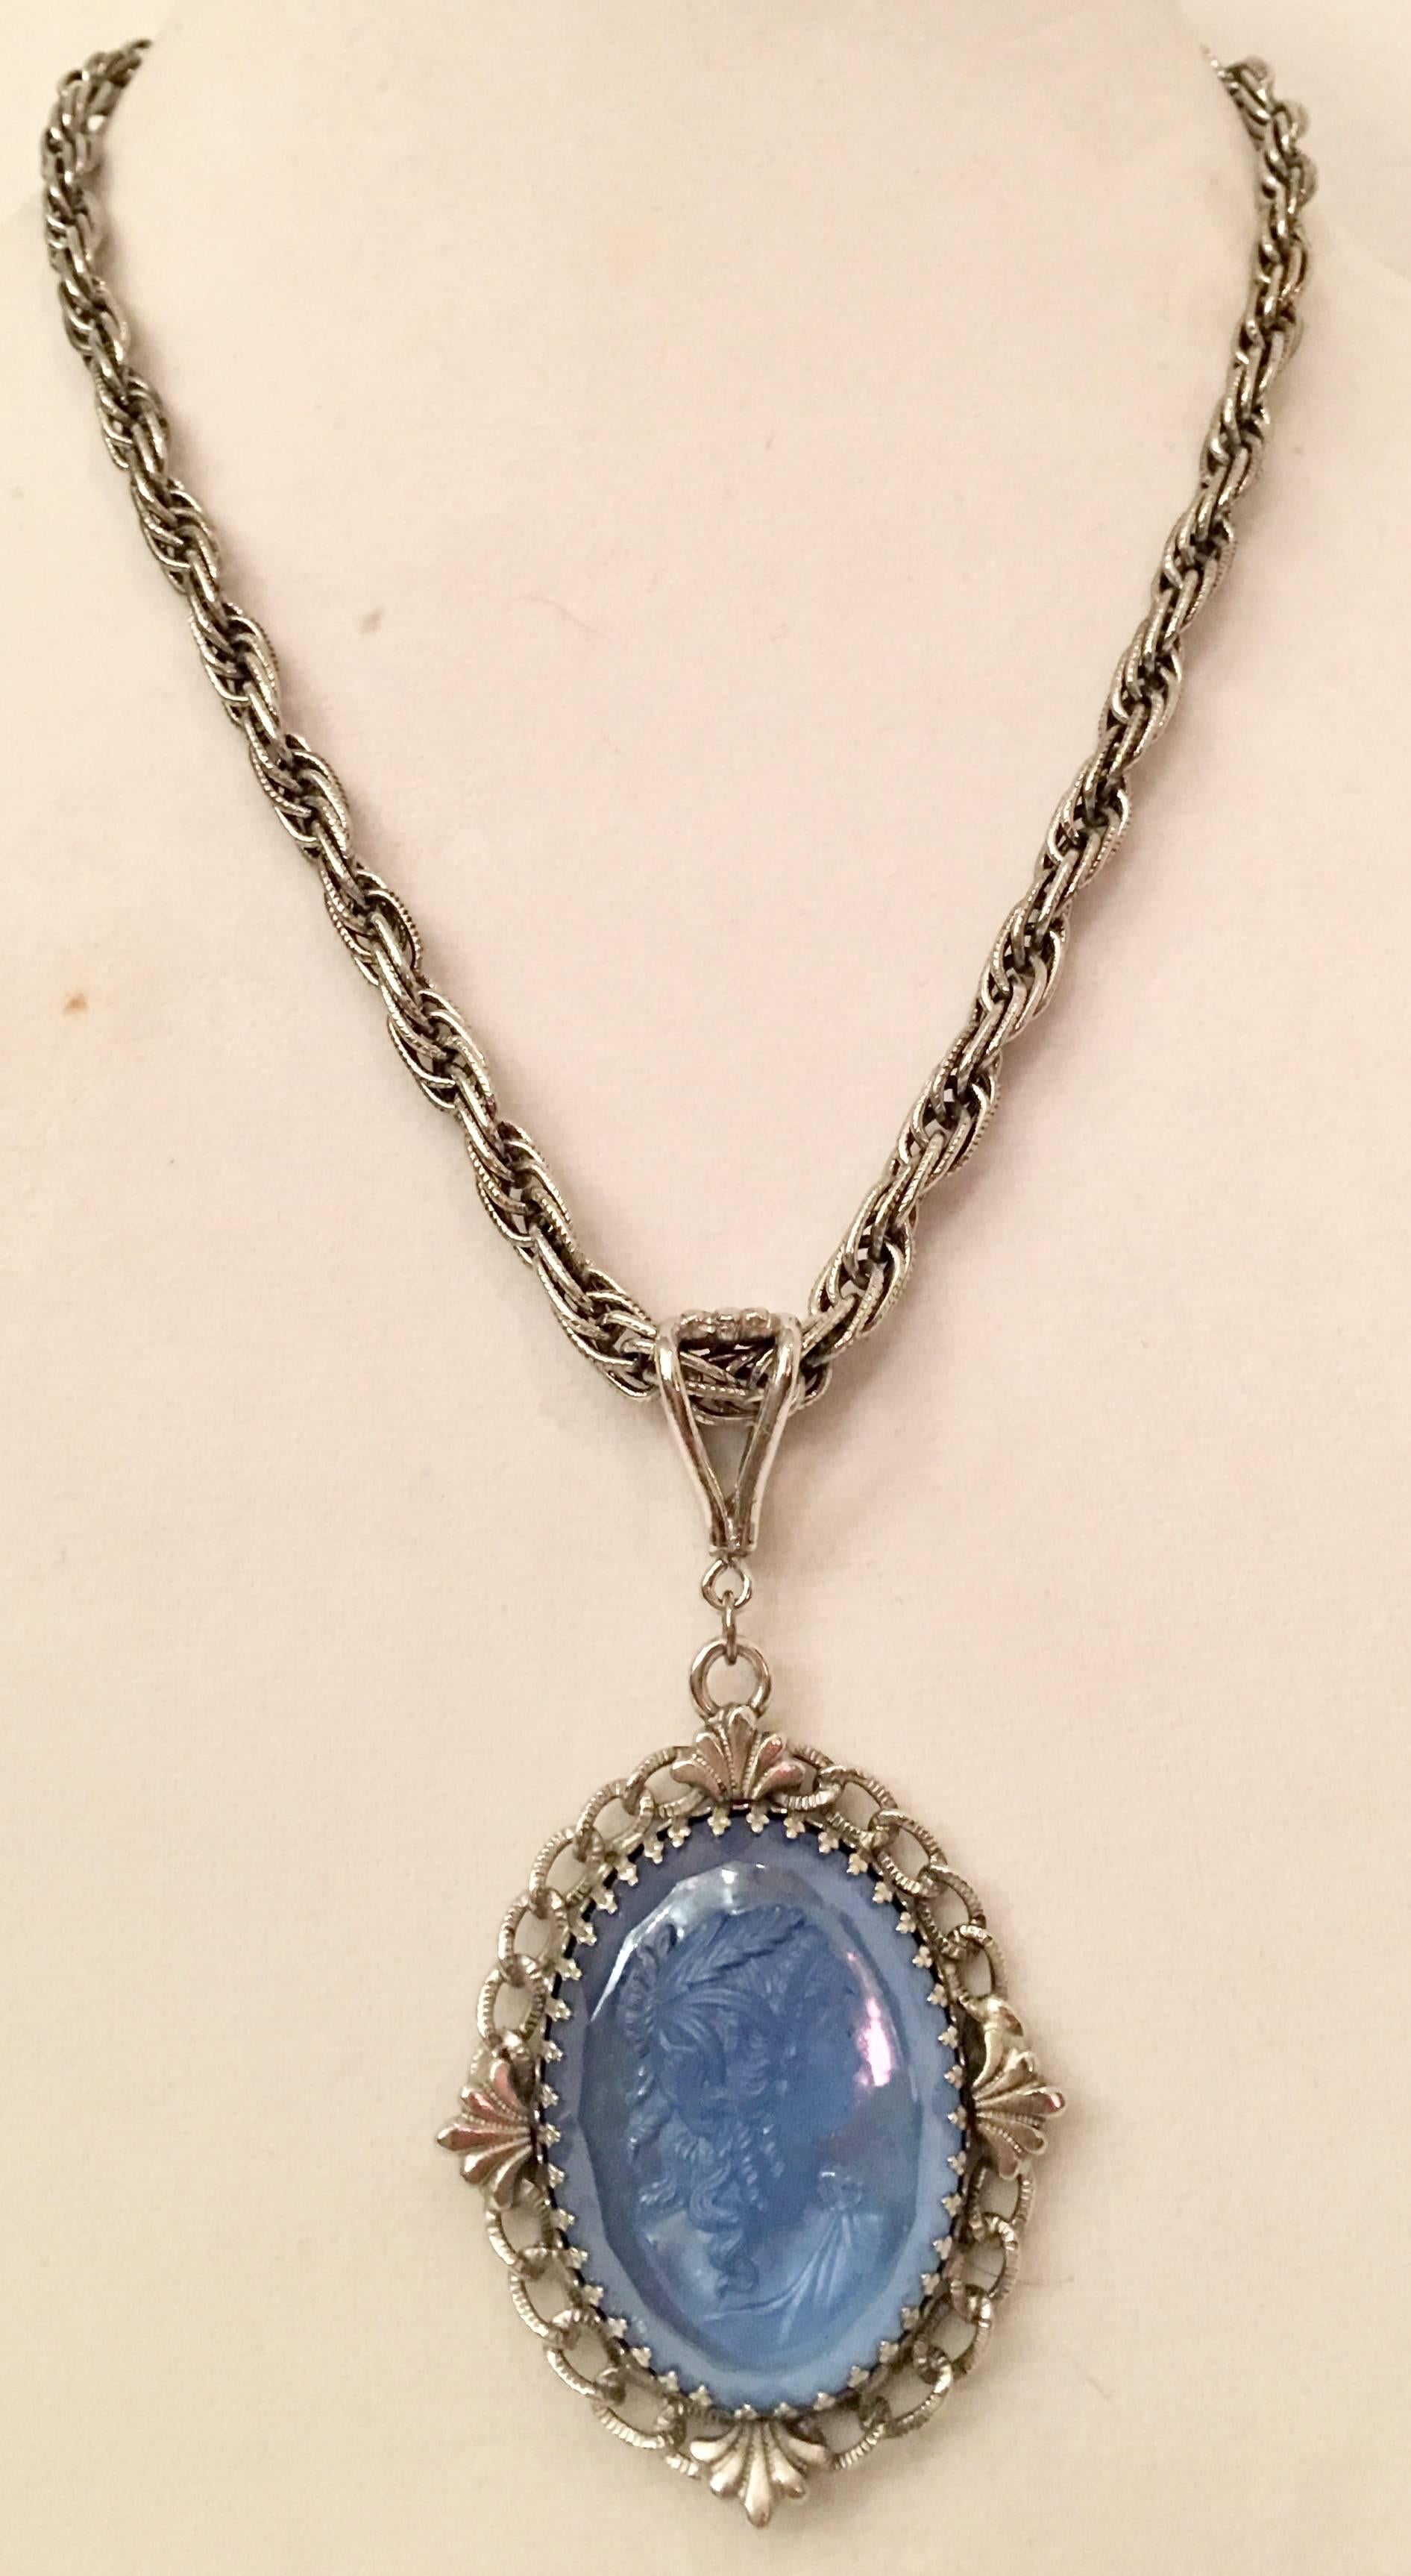 1960'S Silver and carved blue glass high relief cameo pendant necklace by, Whiting & Davis. This two piece necklace features a female profile, right facing blue carved glasses cameo pendant. The carved glass cameo pendant is set in silver rhodium